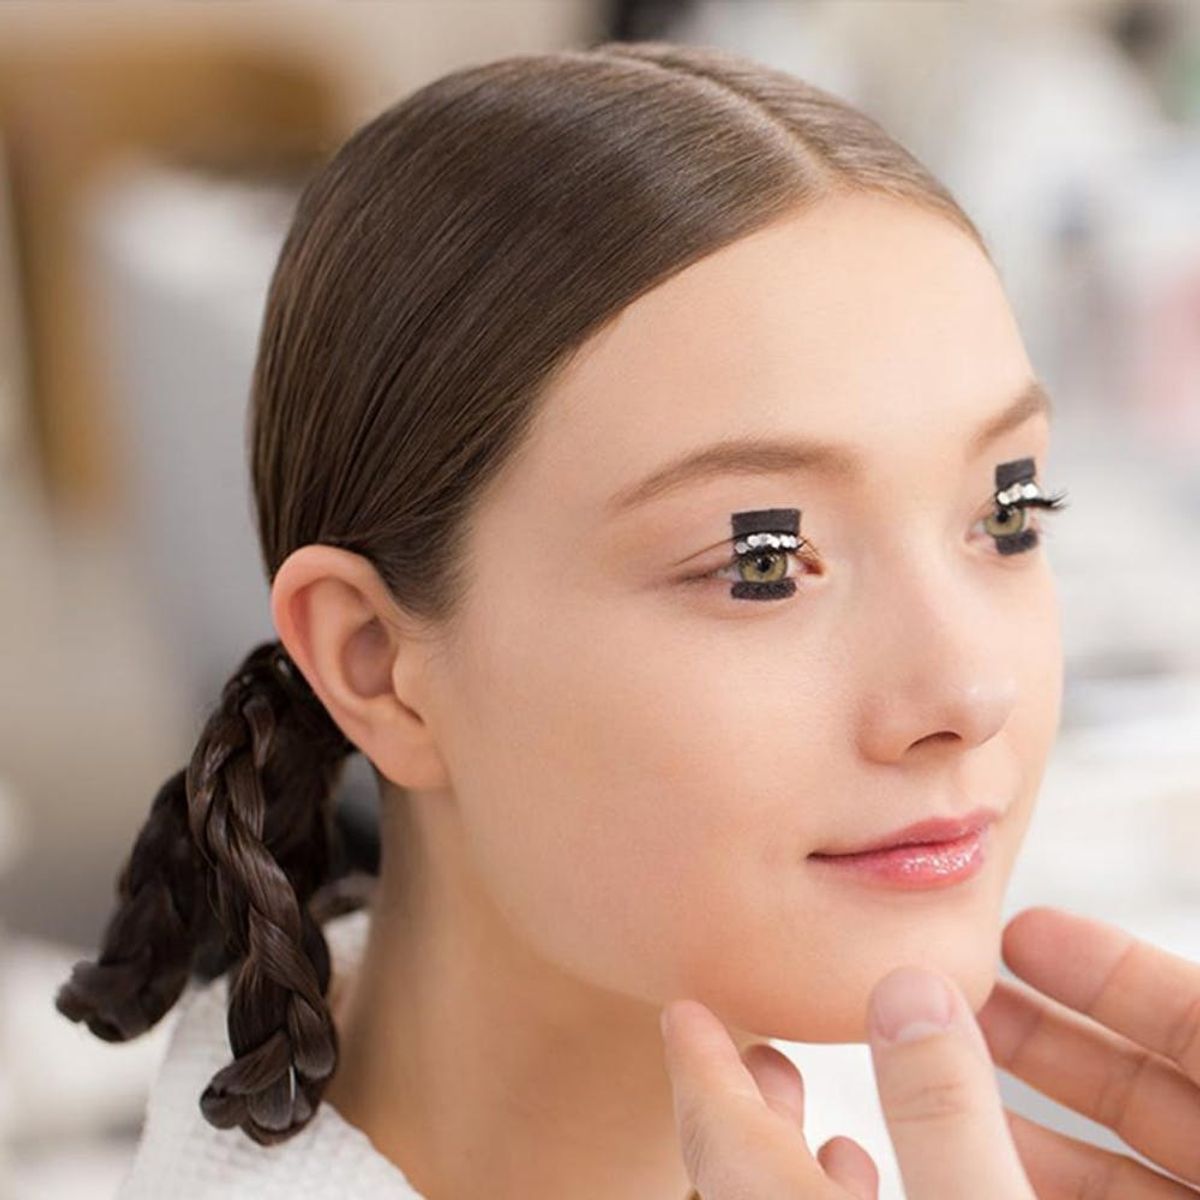 Will *This* Runway Look Be 2015’s Hottest Makeup Trend?